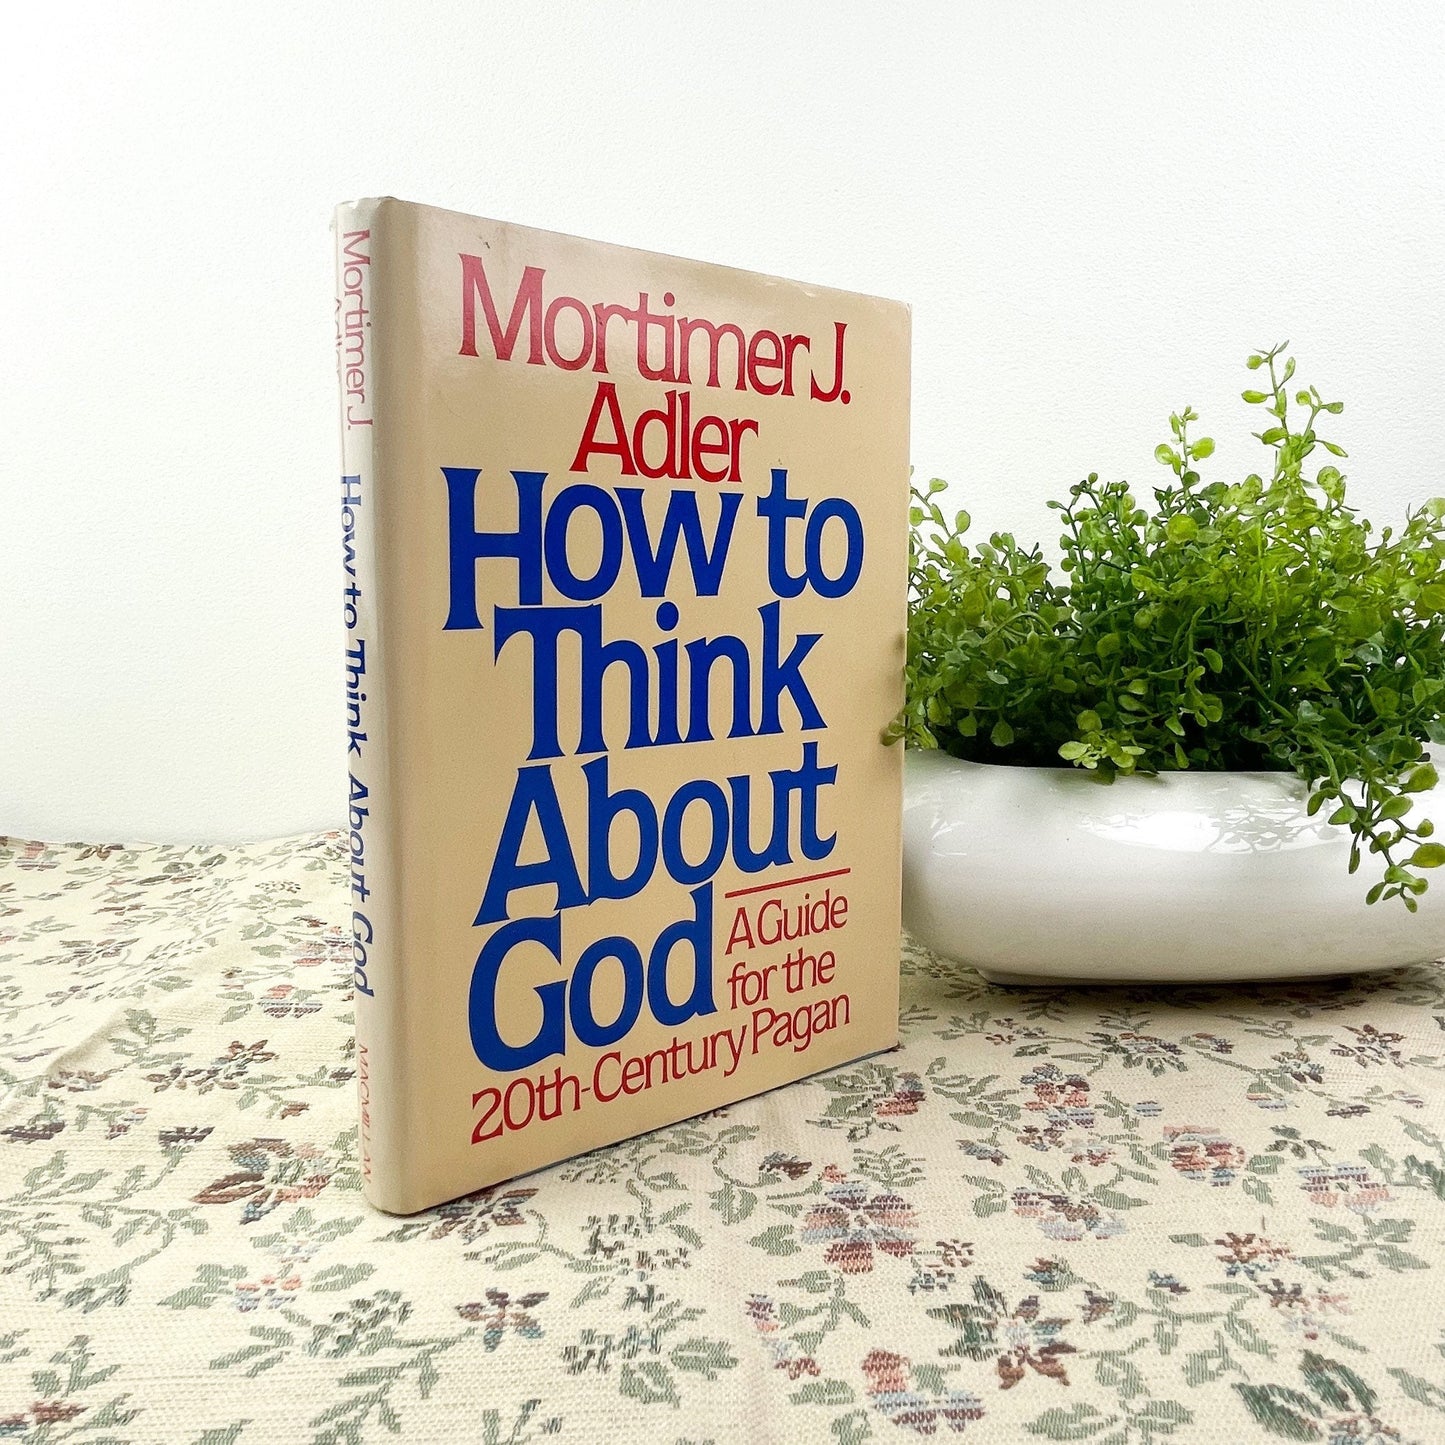 How To Think About God by Mortimer J. Adler